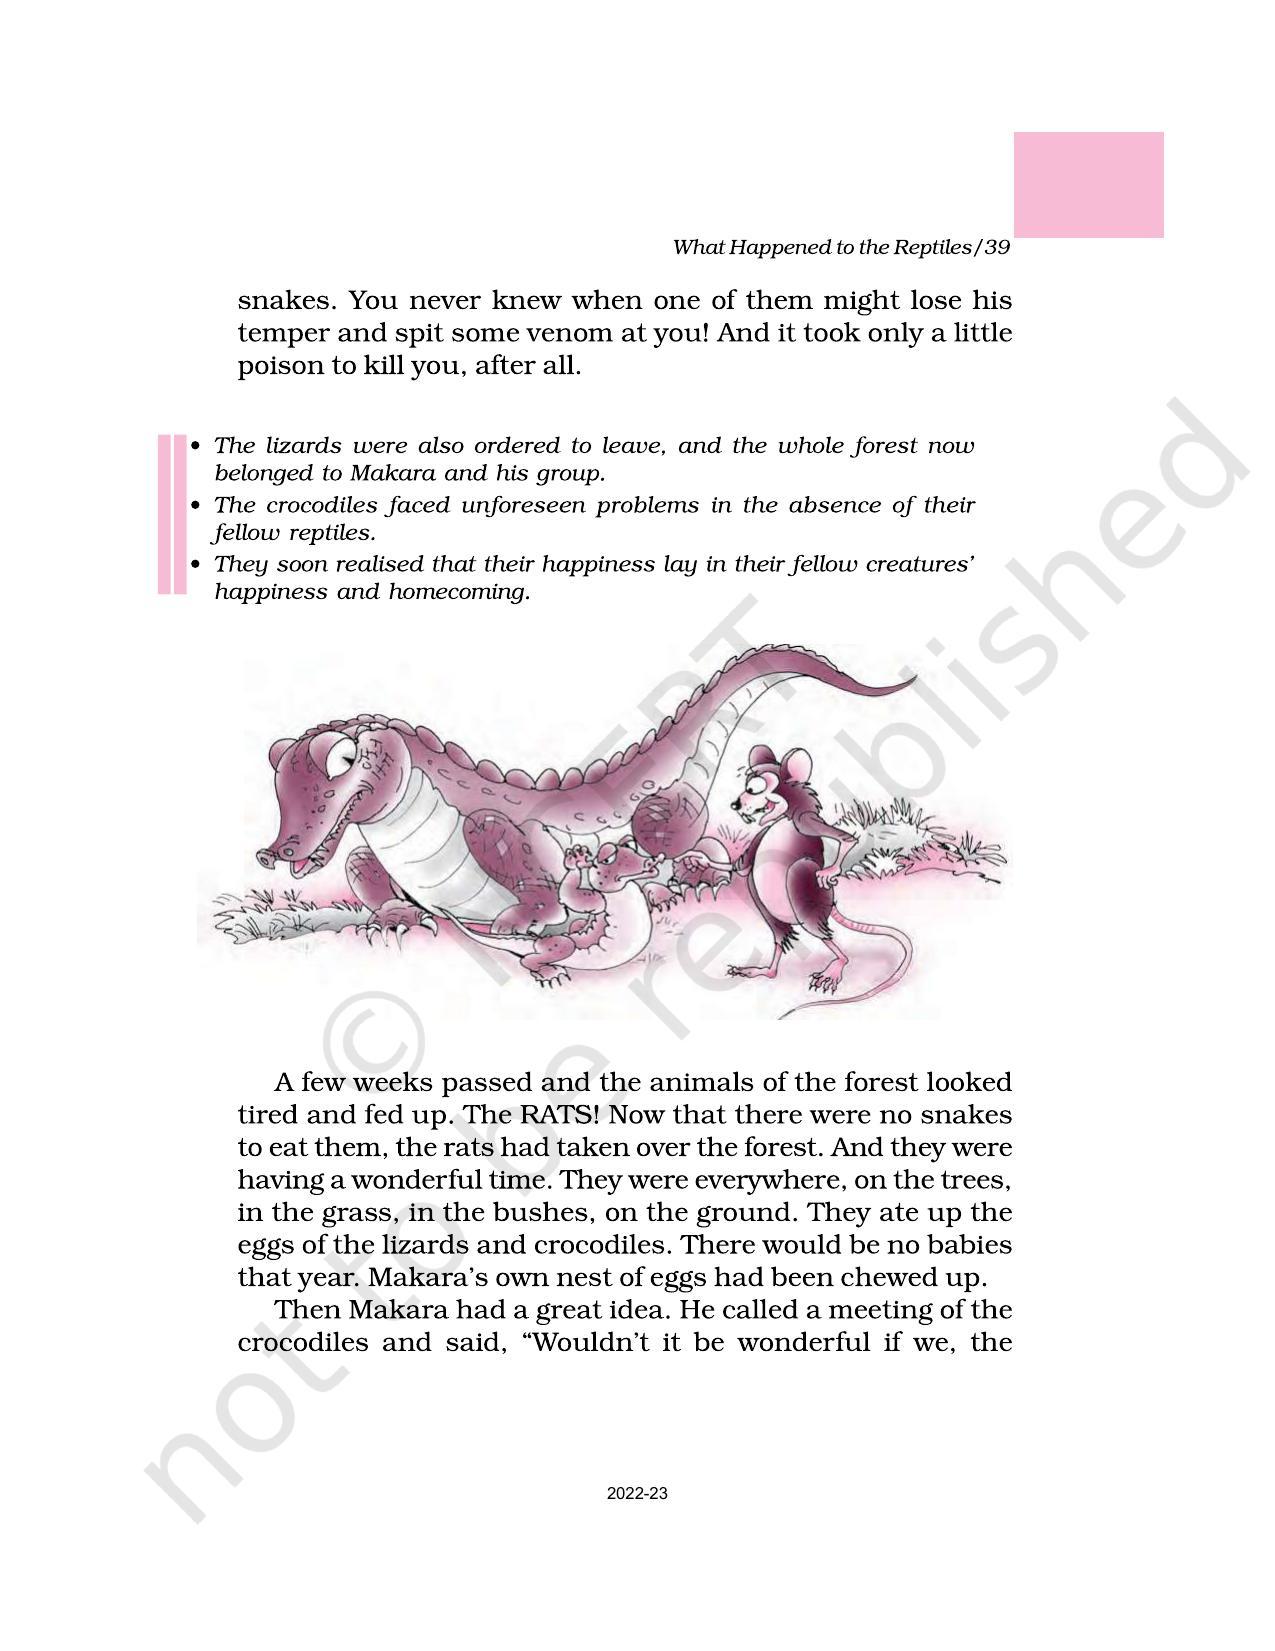 NCERT Book for Class 6 English(A Pact with the Sun) : Chapter 9-What Happened to the Reptiles - Page 7